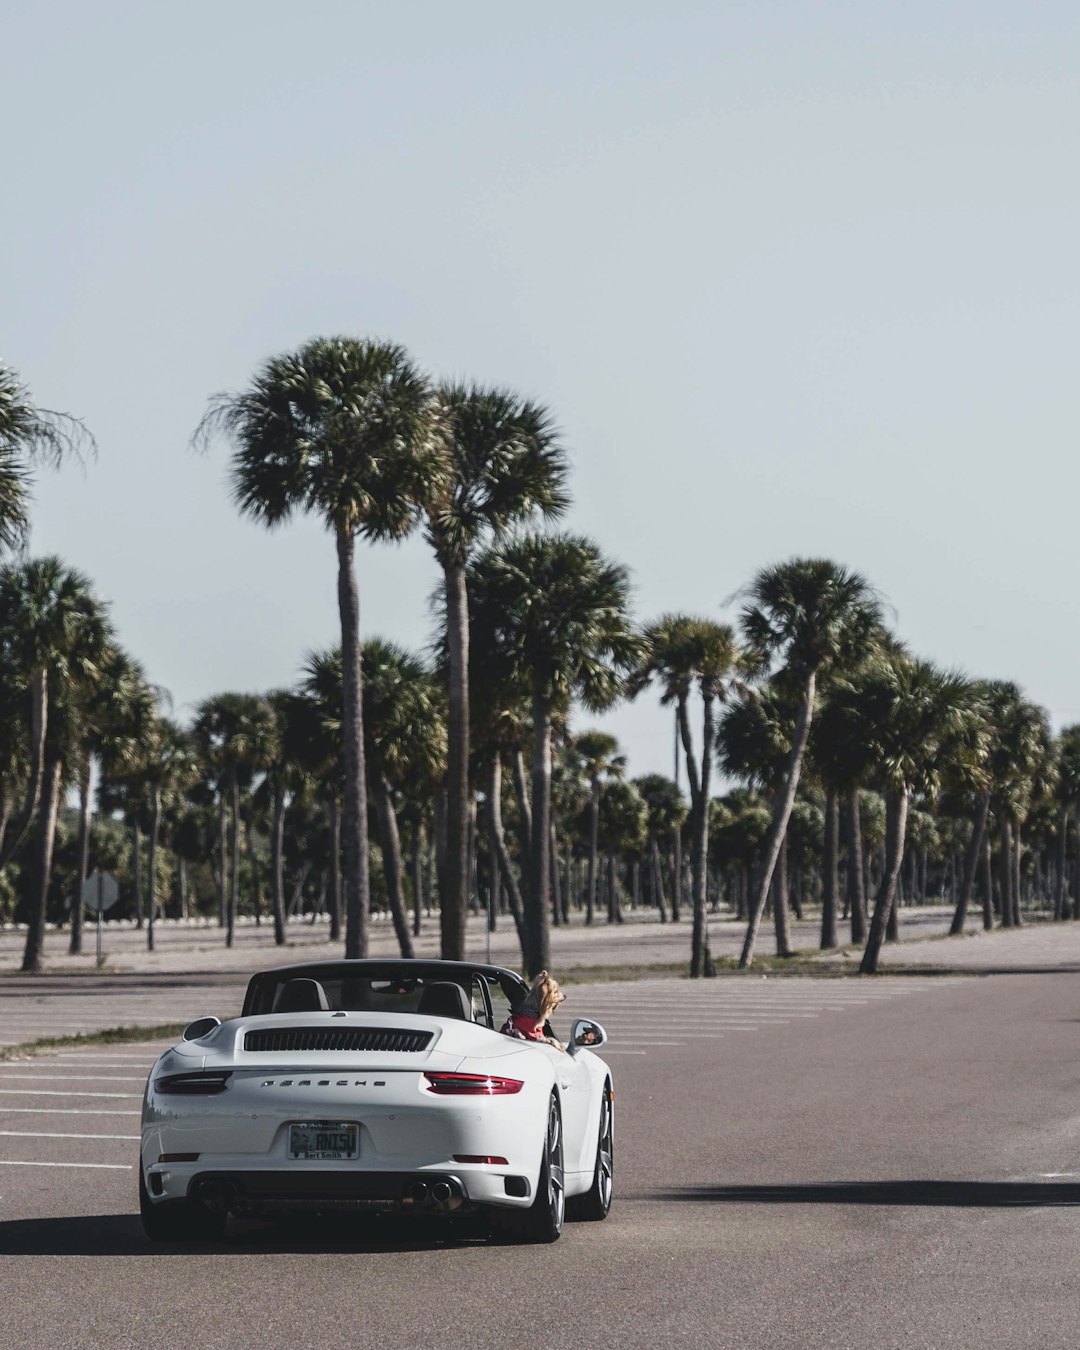 white car on road near palm trees during daytime